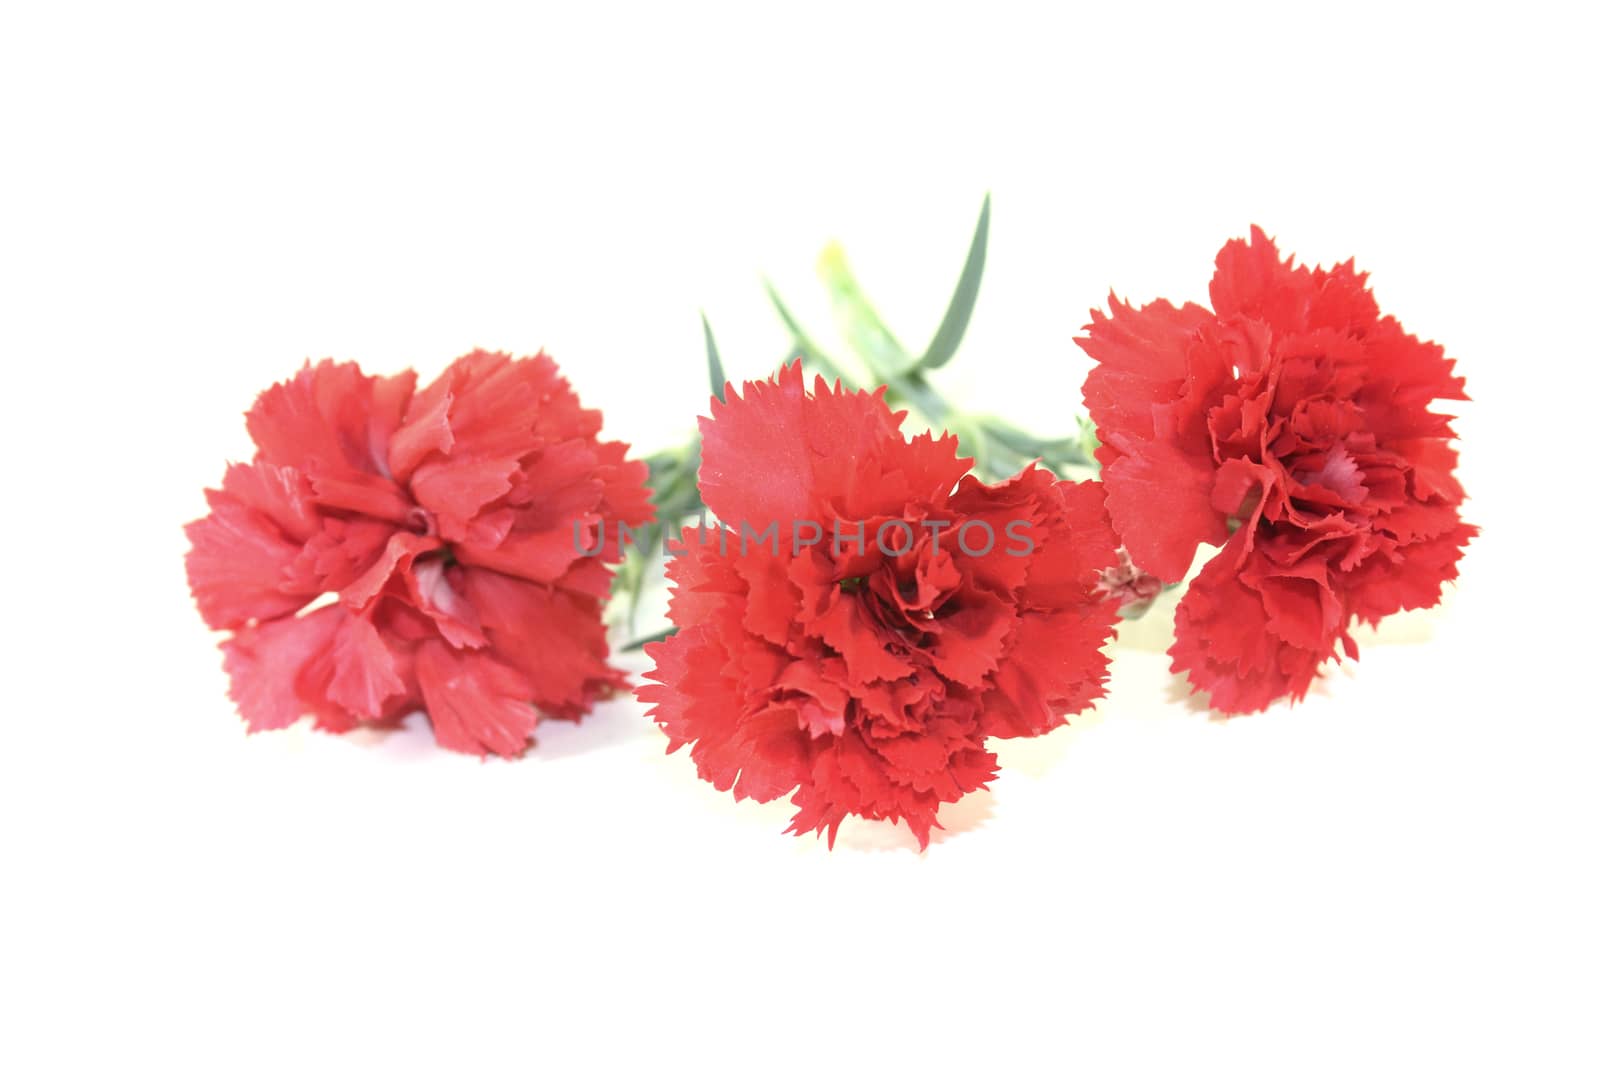 fresh red carnations blossoms on a light background